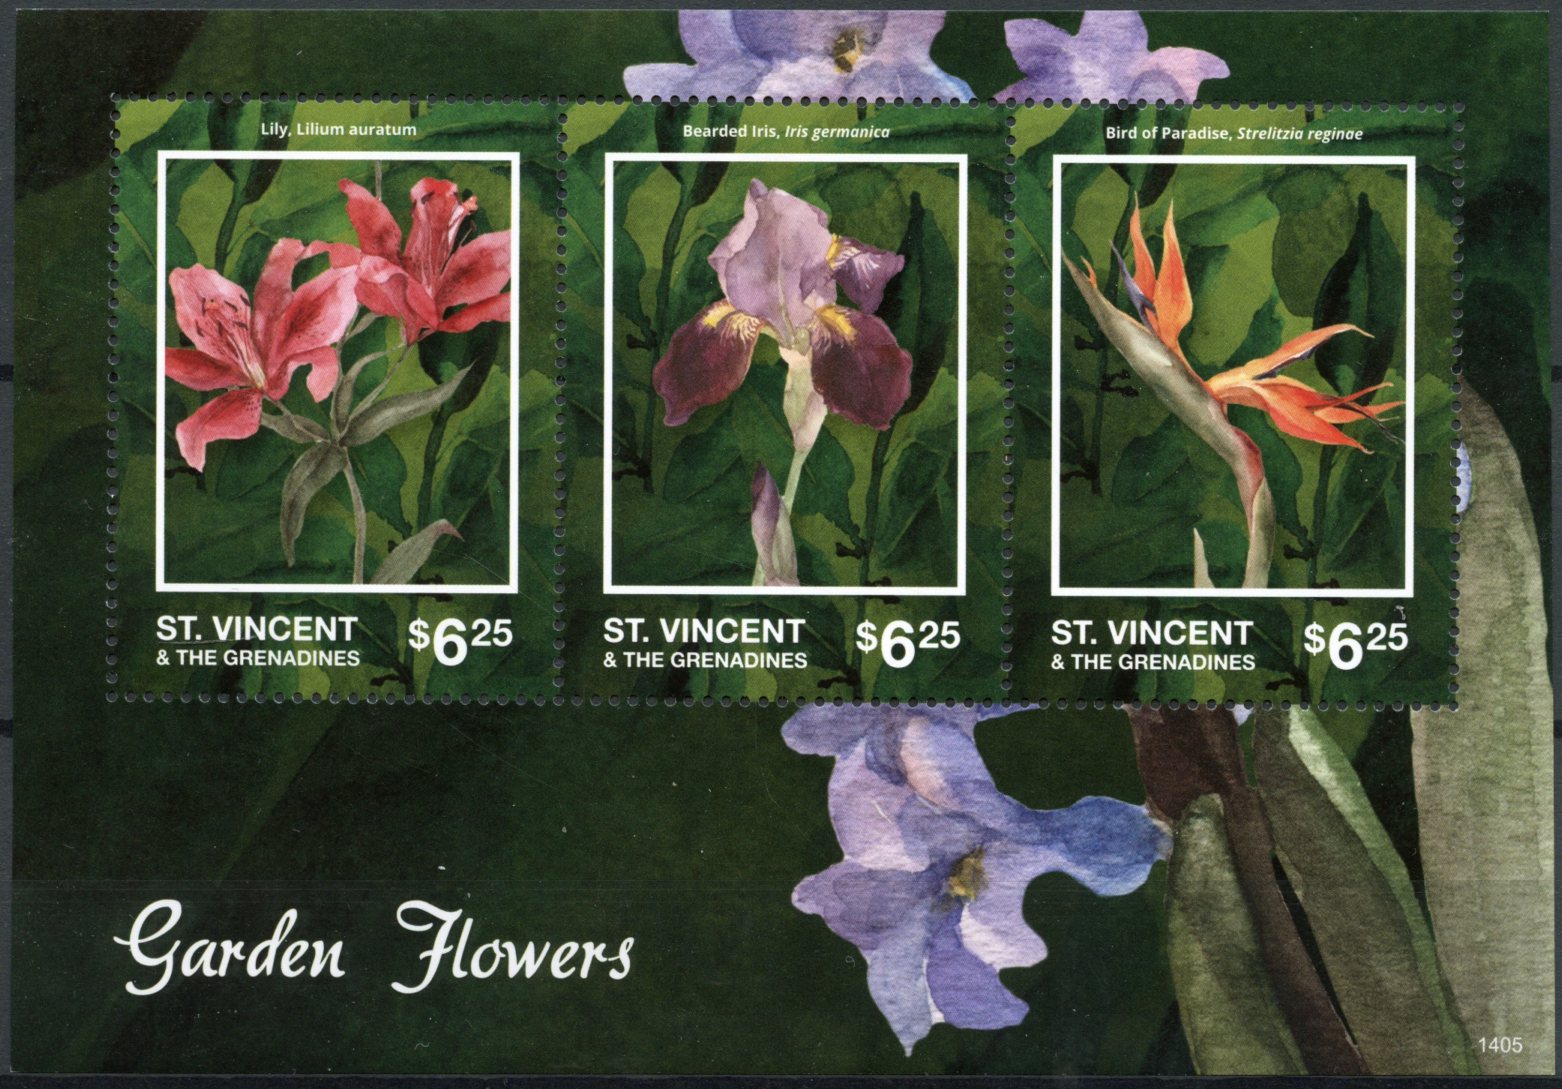 St Vincent & The Grenadines 2014 MNH Garden Flowers II 3v MS Lily Iris Germanica